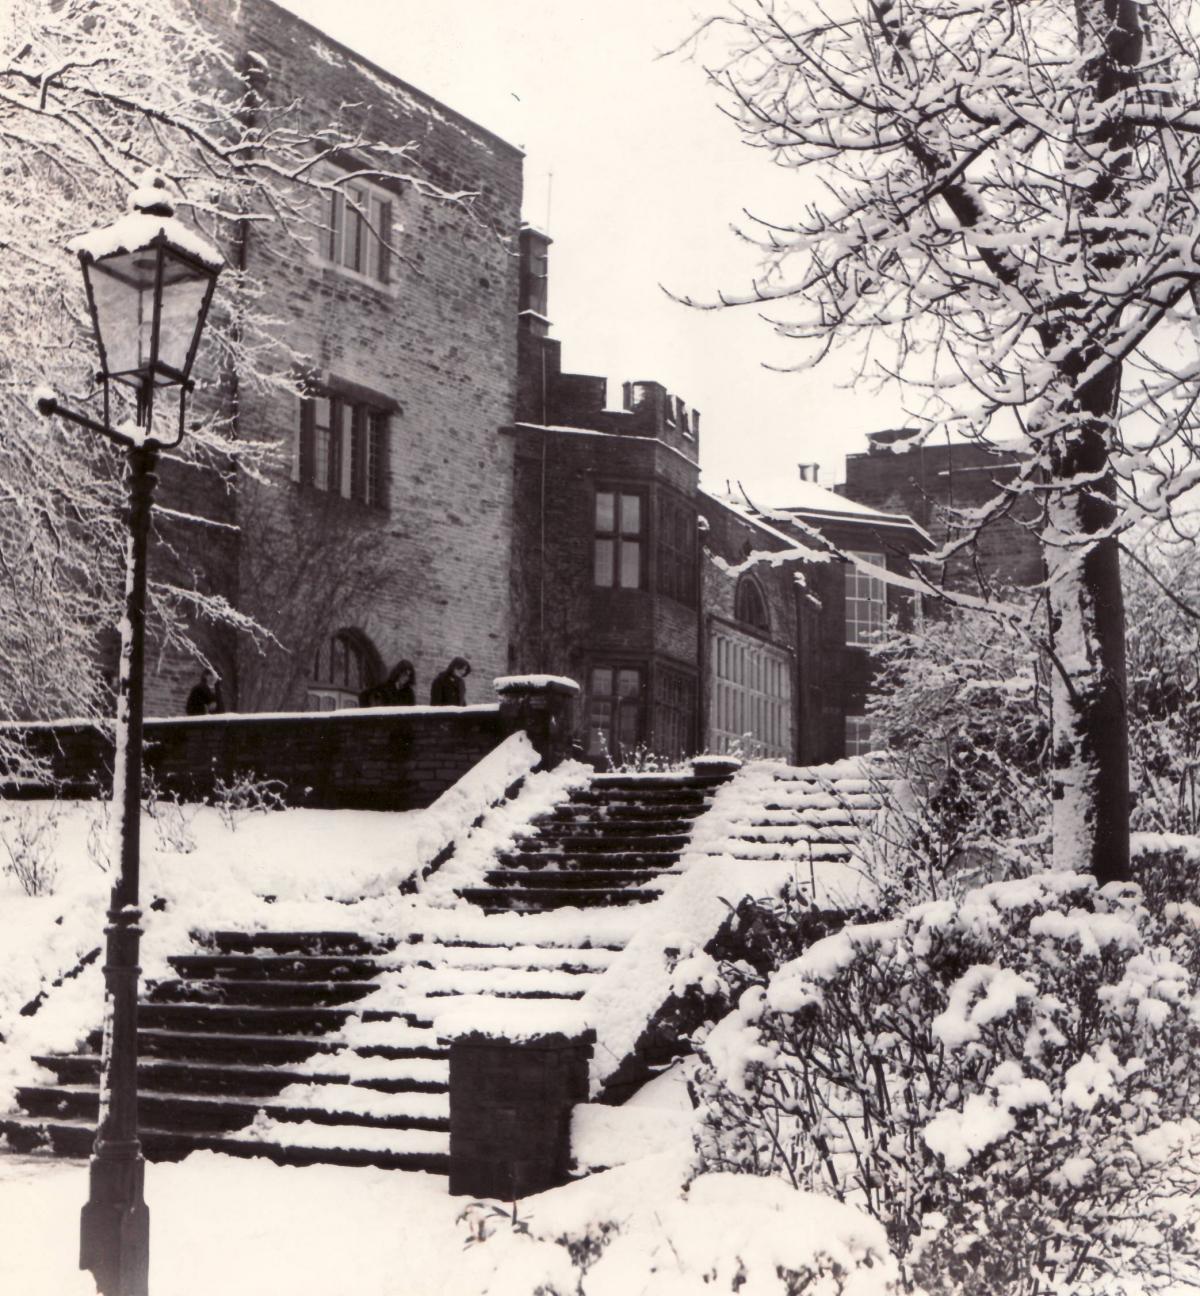 Bolling Hall pictured in 1968